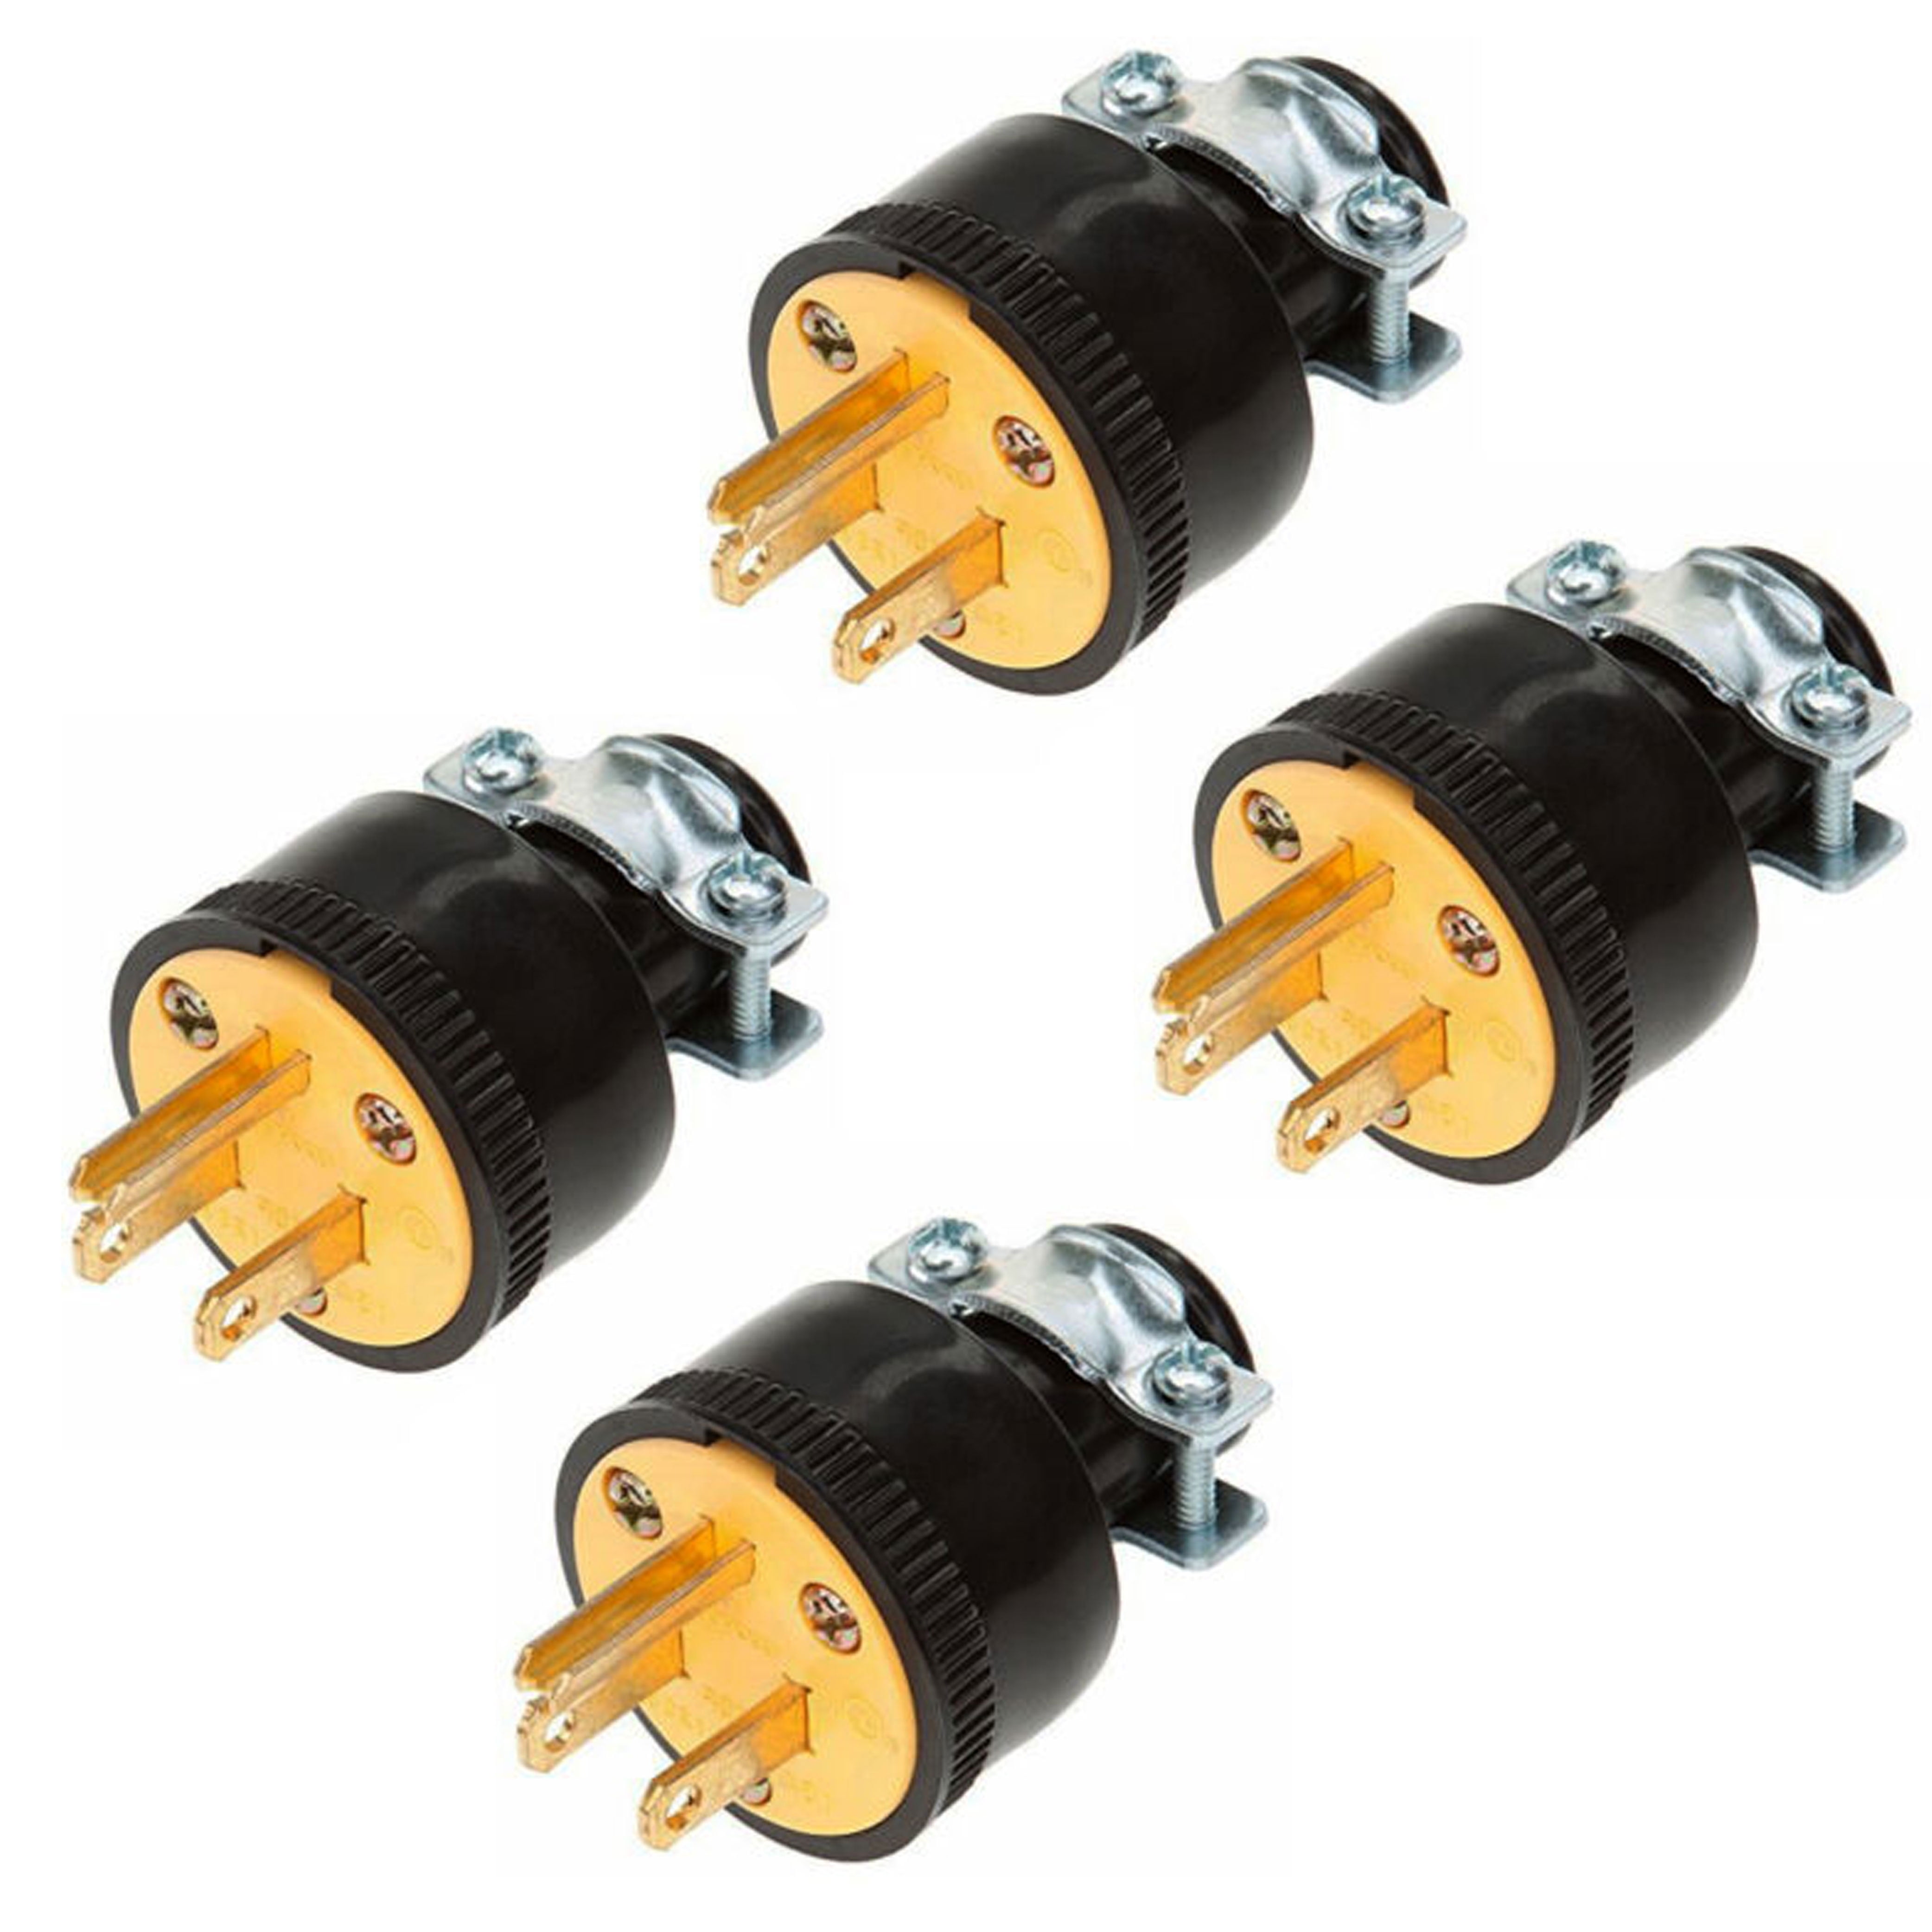 4pc MALE REPLACEMENT EXTENSION CORD ELECTRICAL WIRE REPAIR PLUG ENDS 15A 125V 